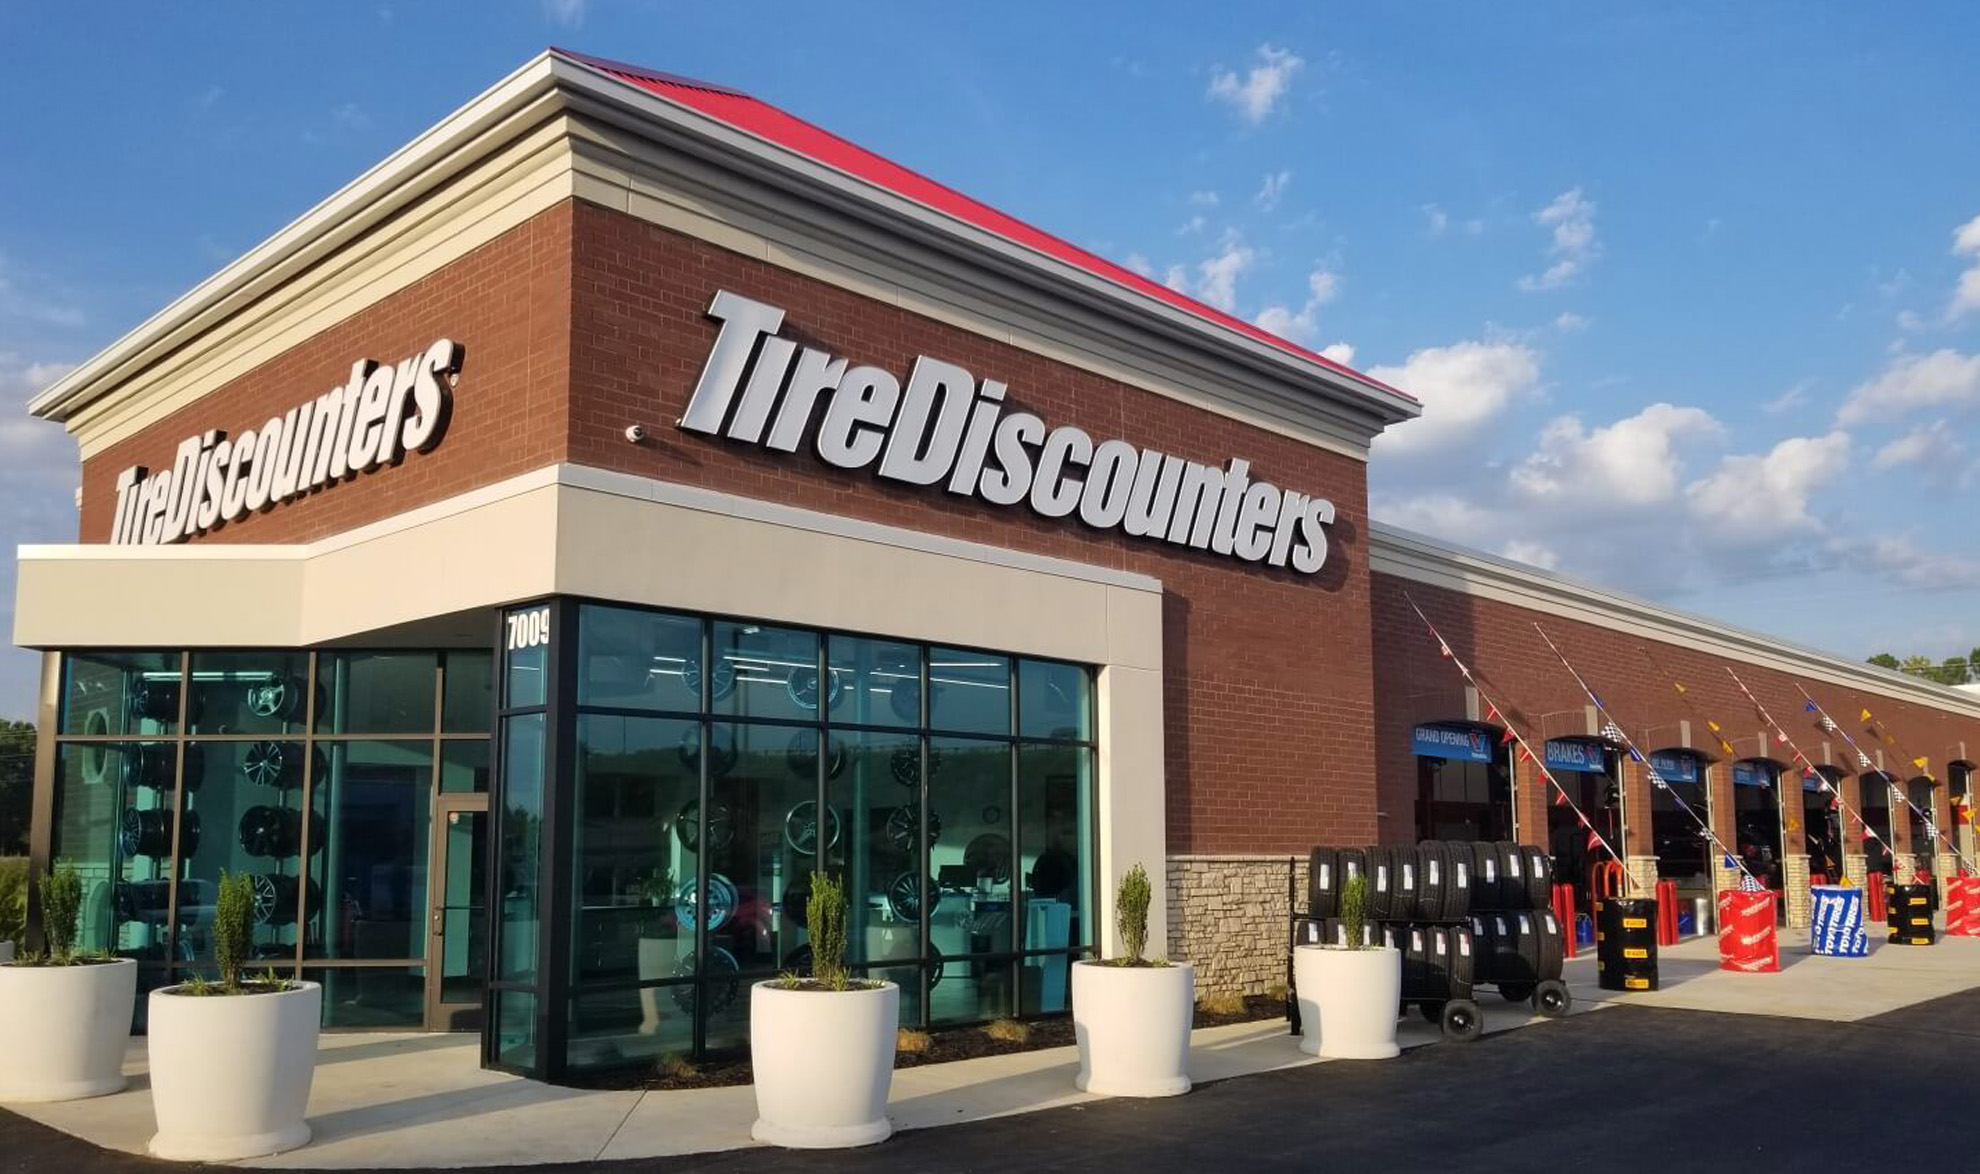 Exterior view of Tire Discounters building